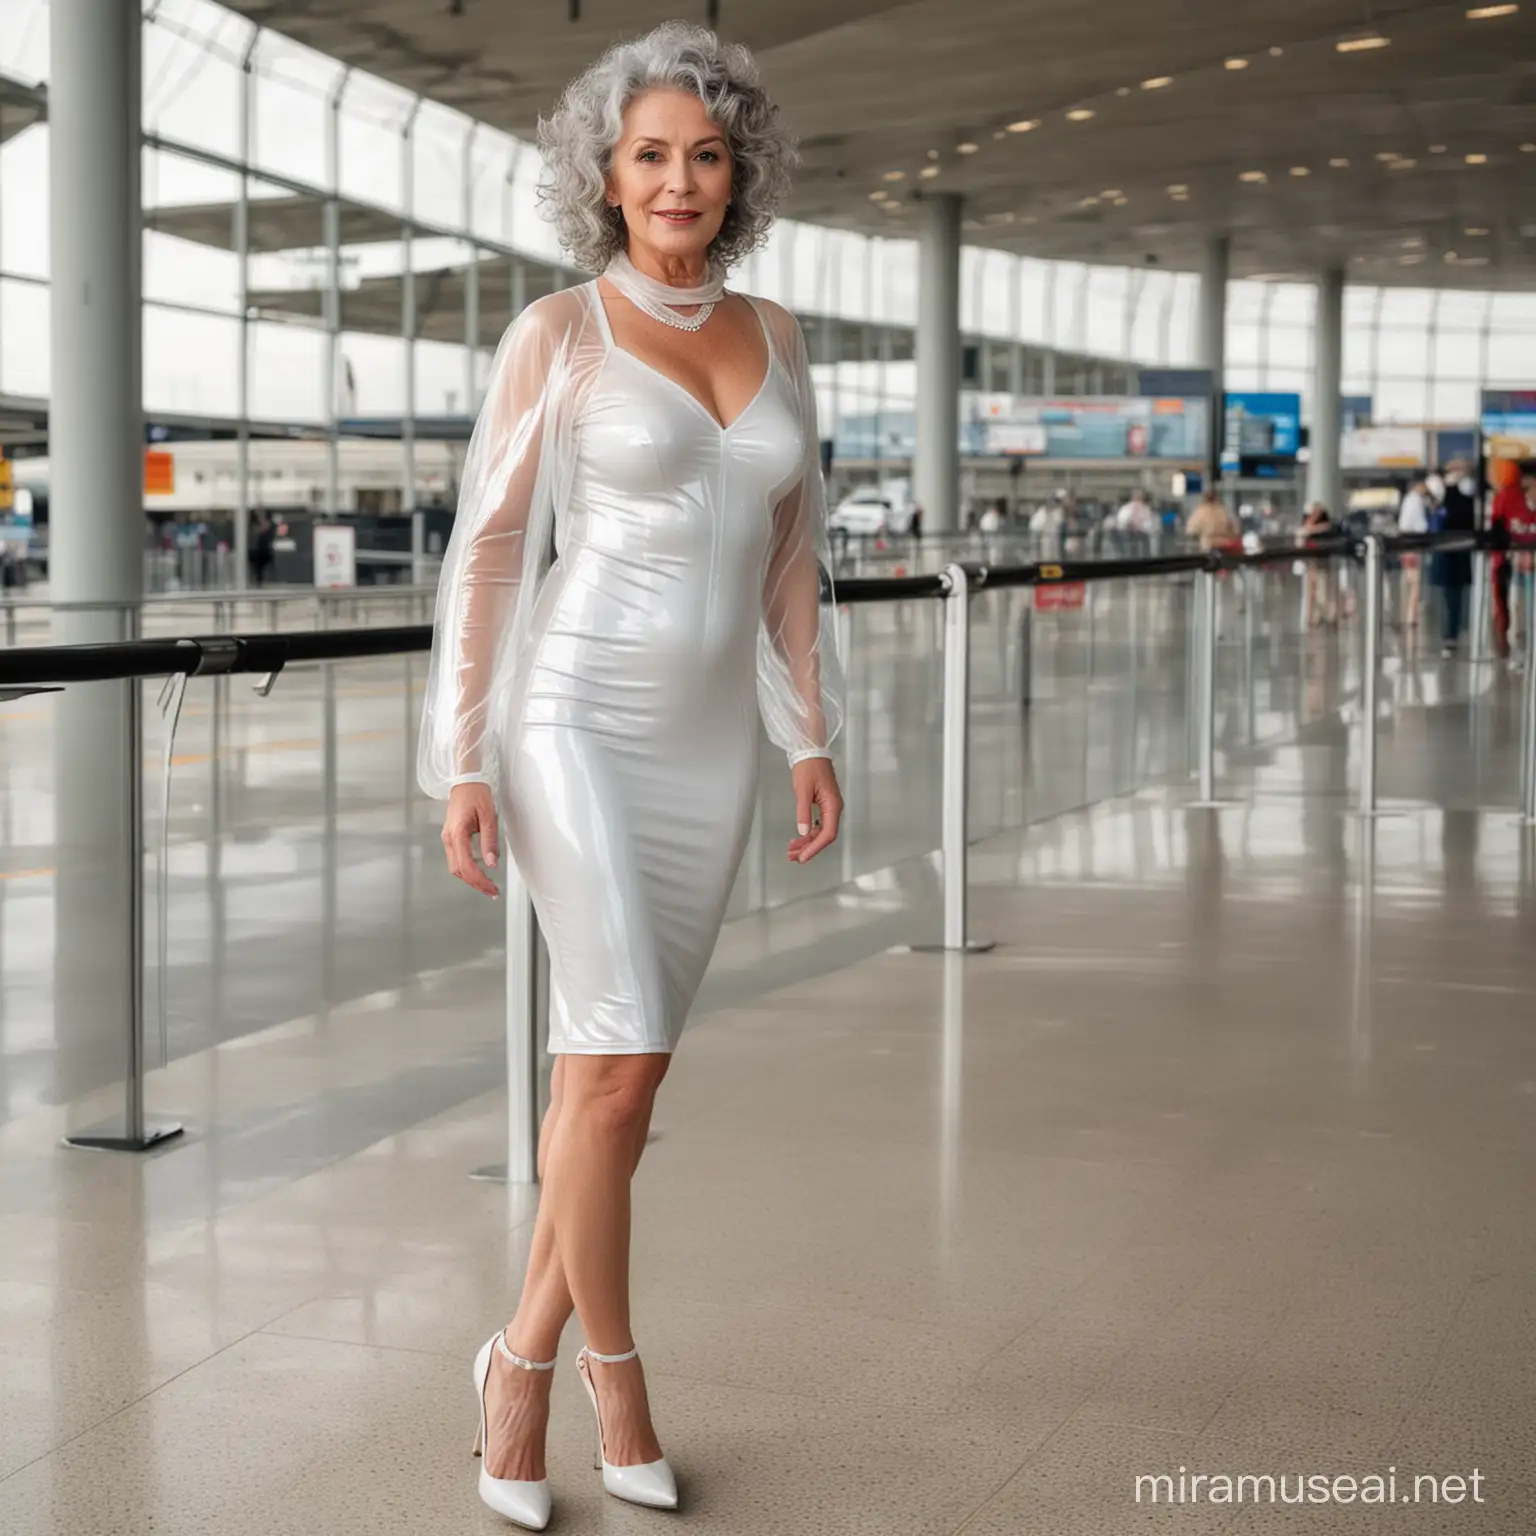 Elegant 70YearOld Woman in Open Crotch Latex Dress at Airport